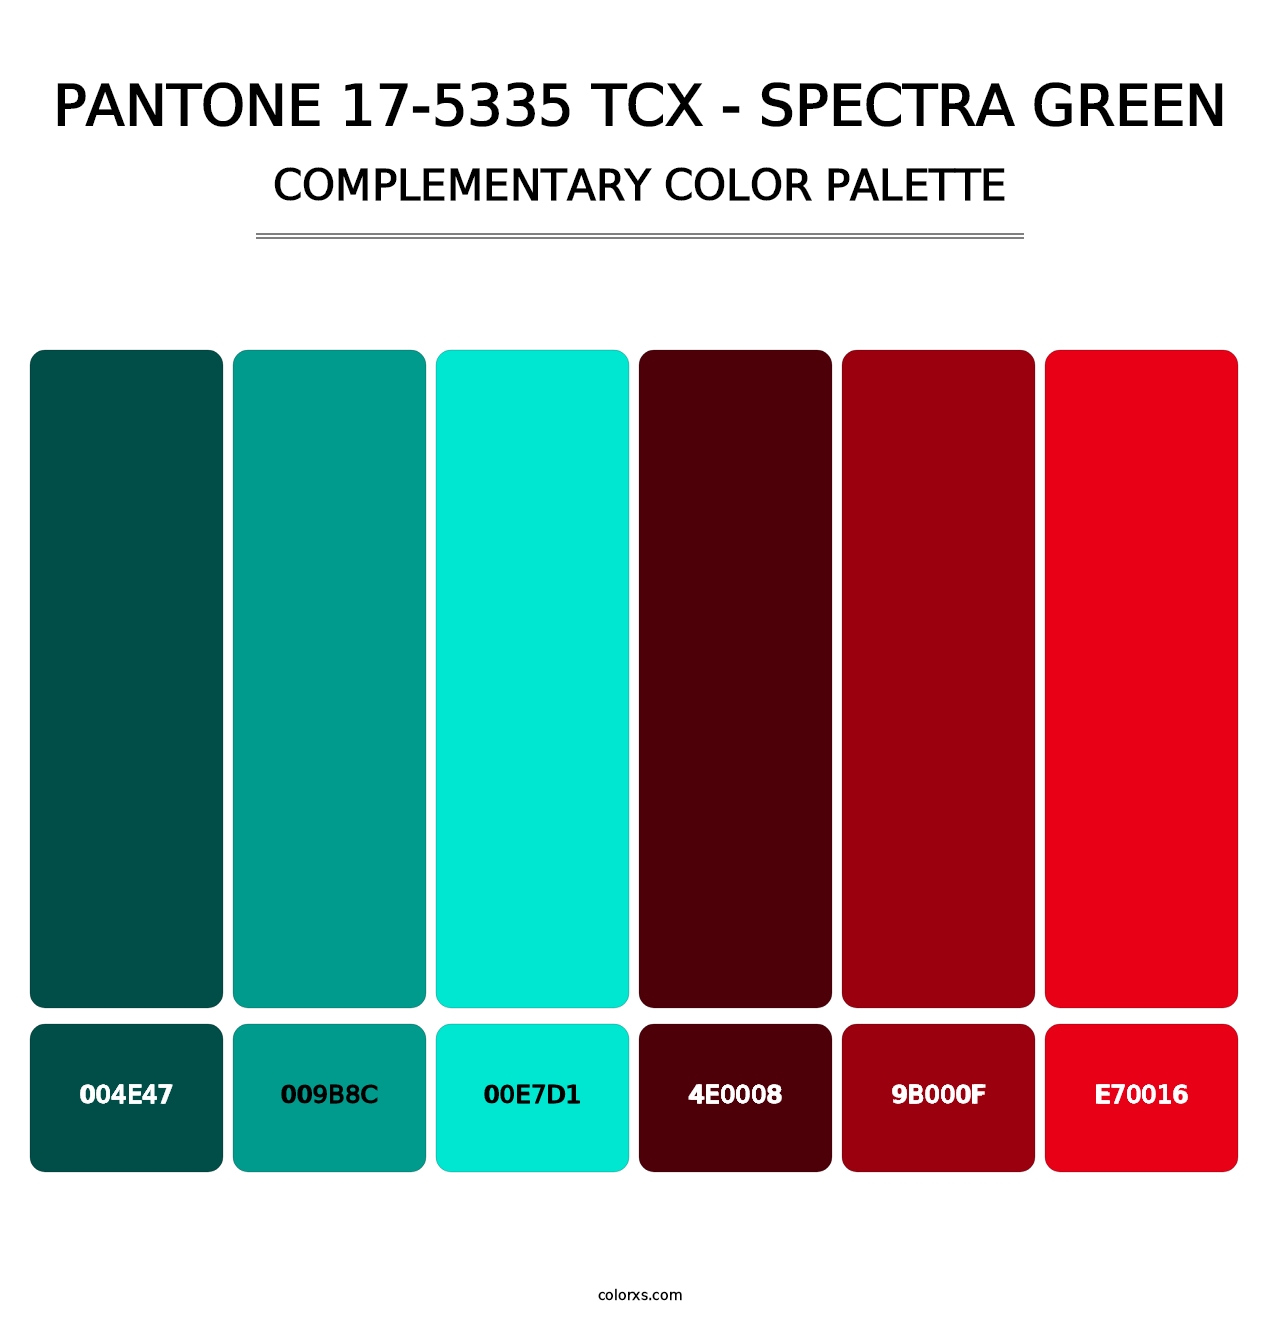 PANTONE 17-5335 TCX - Spectra Green - Complementary Color Palette